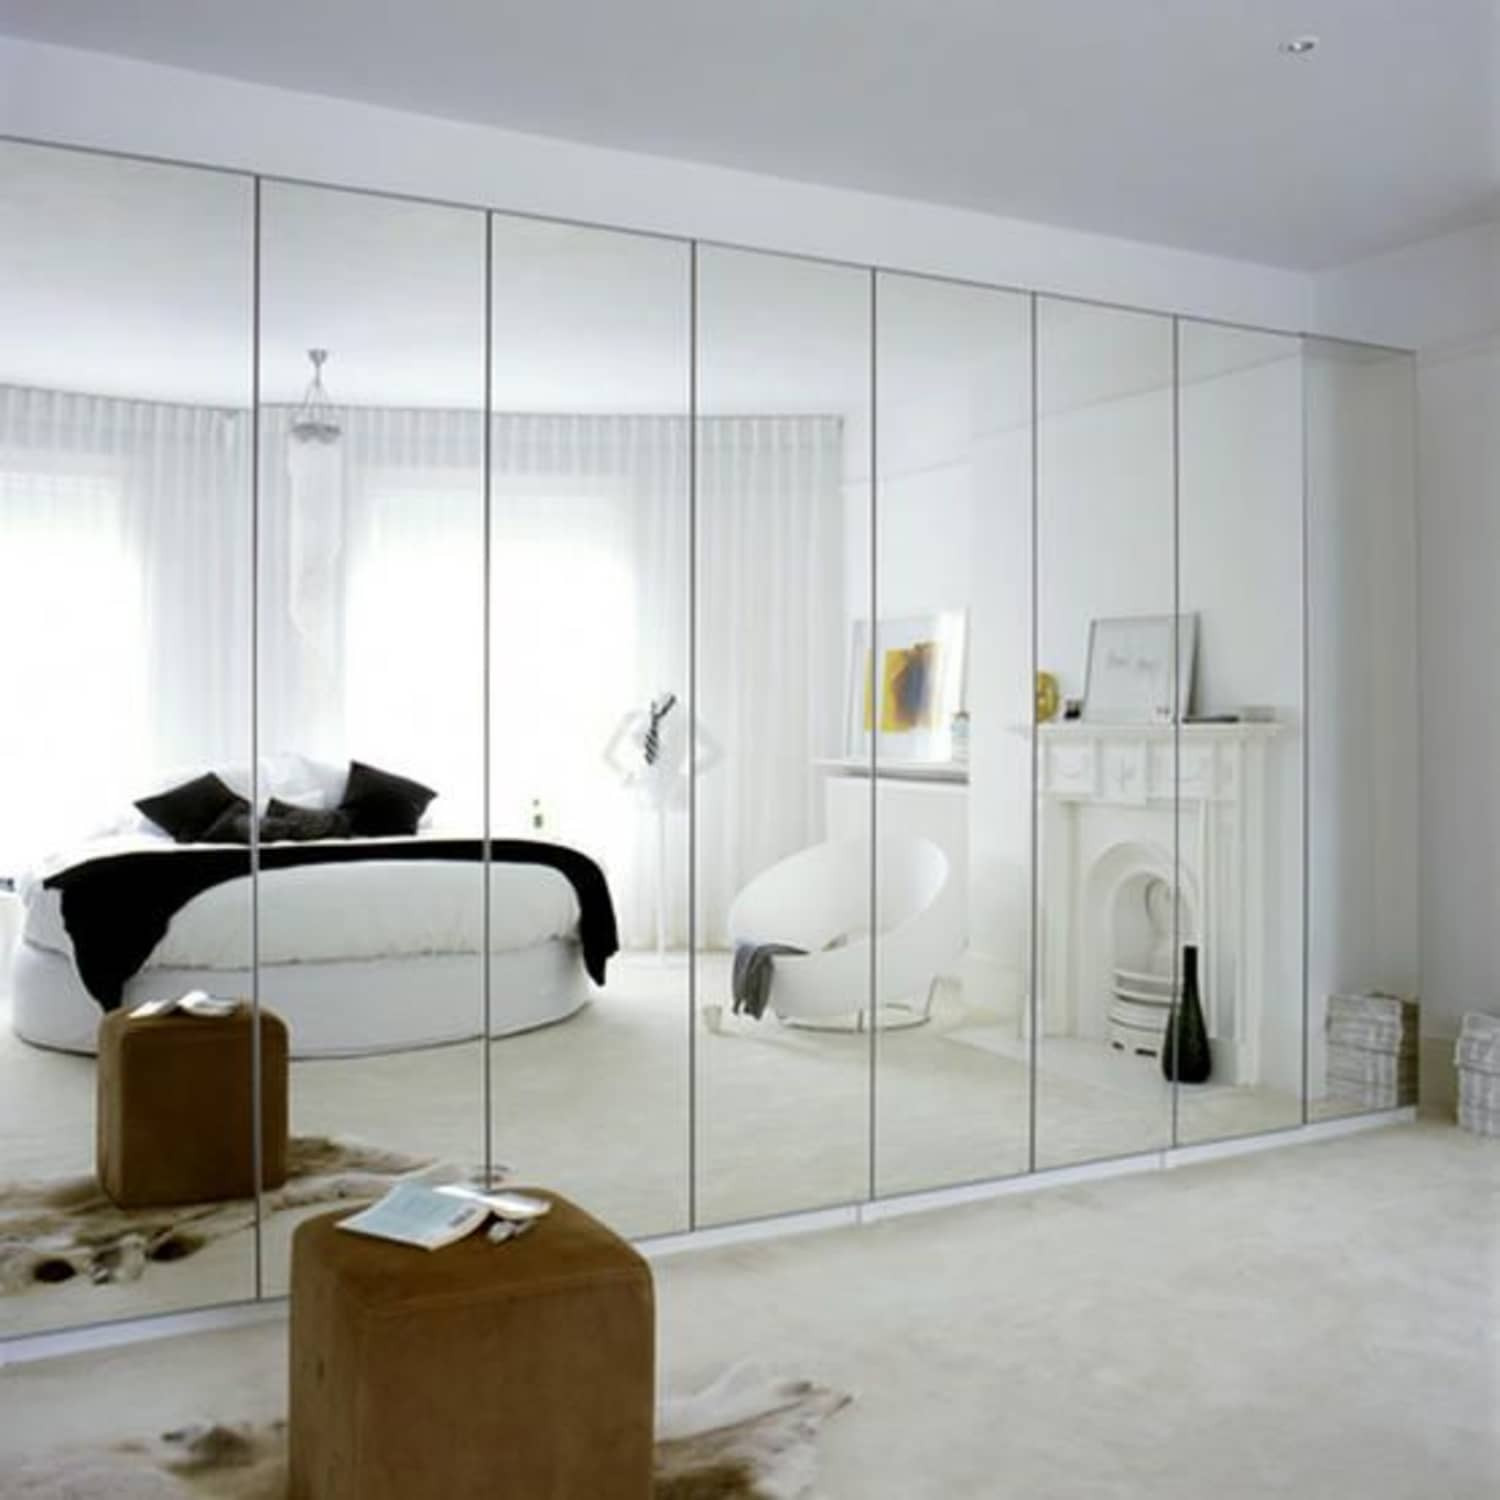 Mirrors For Bedroom Walls
 Plagued With Dated Mirrored Walls 5 Design Ideas to Make